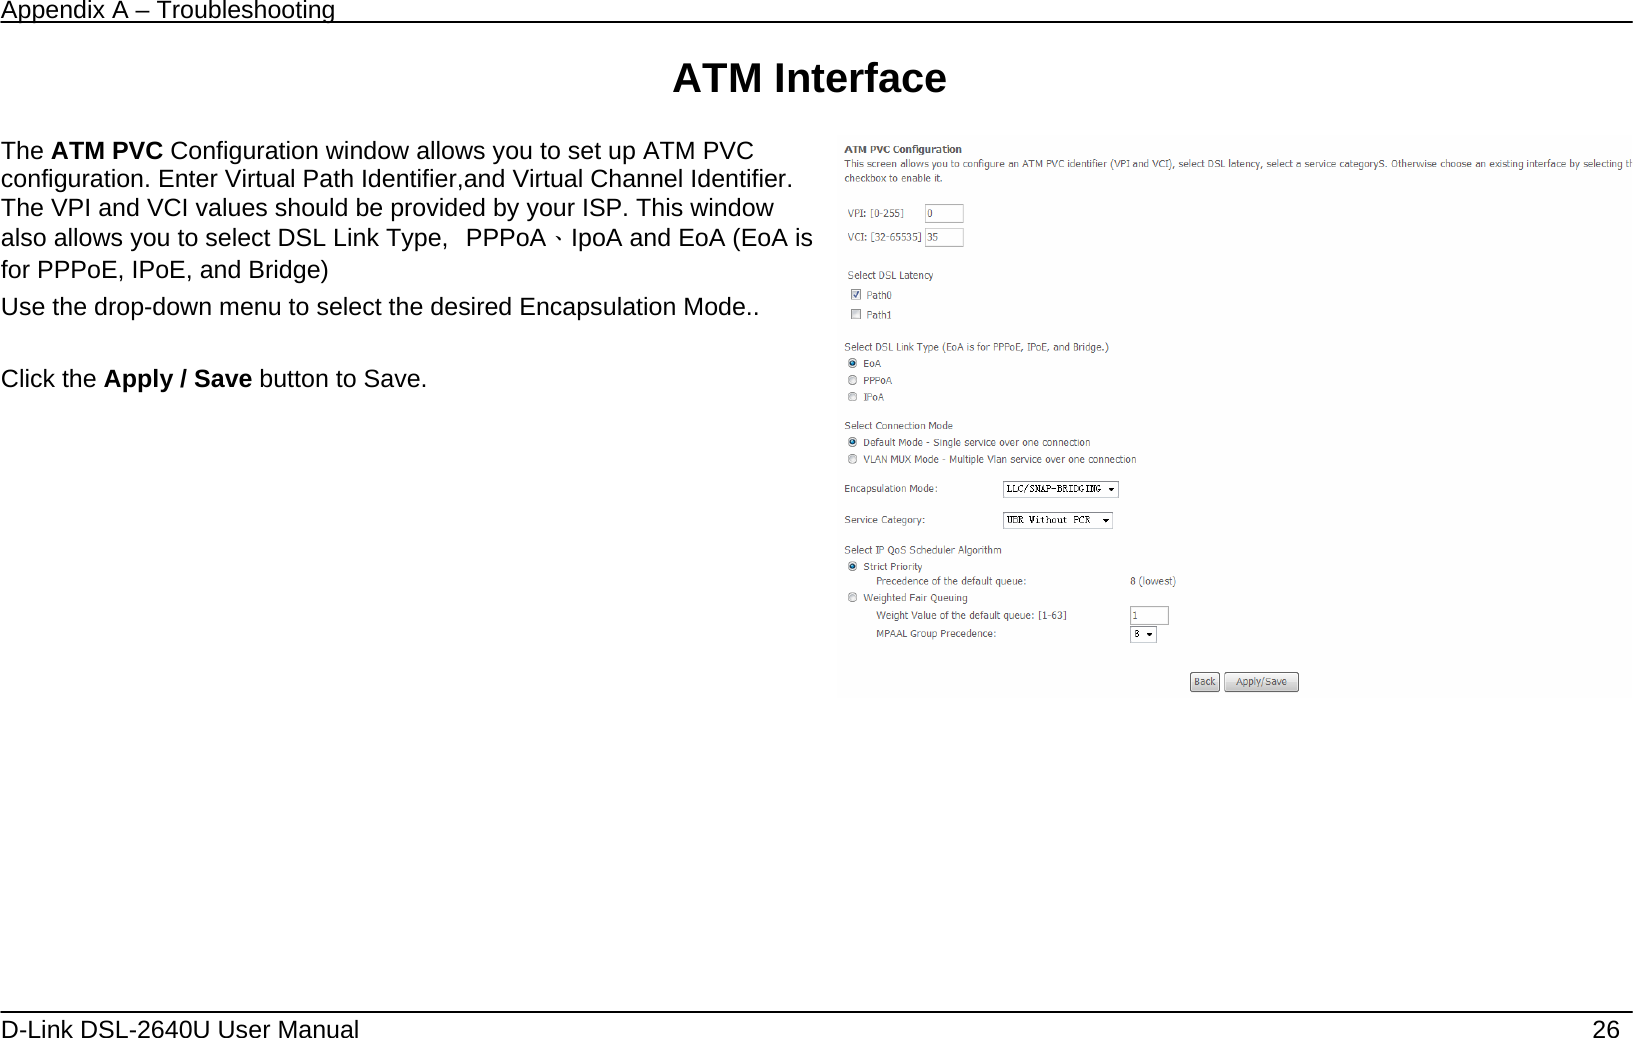 Appendix A – Troubleshooting   D-Link DSL-2640U User Manual    26 ATM Interface           The ATM PVC Configuration window allows you to set up ATM PVC configuration. Enter Virtual Path Identifier,and Virtual Channel Identifier. The VPI and VCI values should be provided by your ISP. This window also allows you to select DSL Link Type,  PPPoA、IpoA and EoA (EoA is for PPPoE, IPoE, and Bridge) Use the drop-down menu to select the desired Encapsulation Mode..  Click the Apply / Save button to Save.               